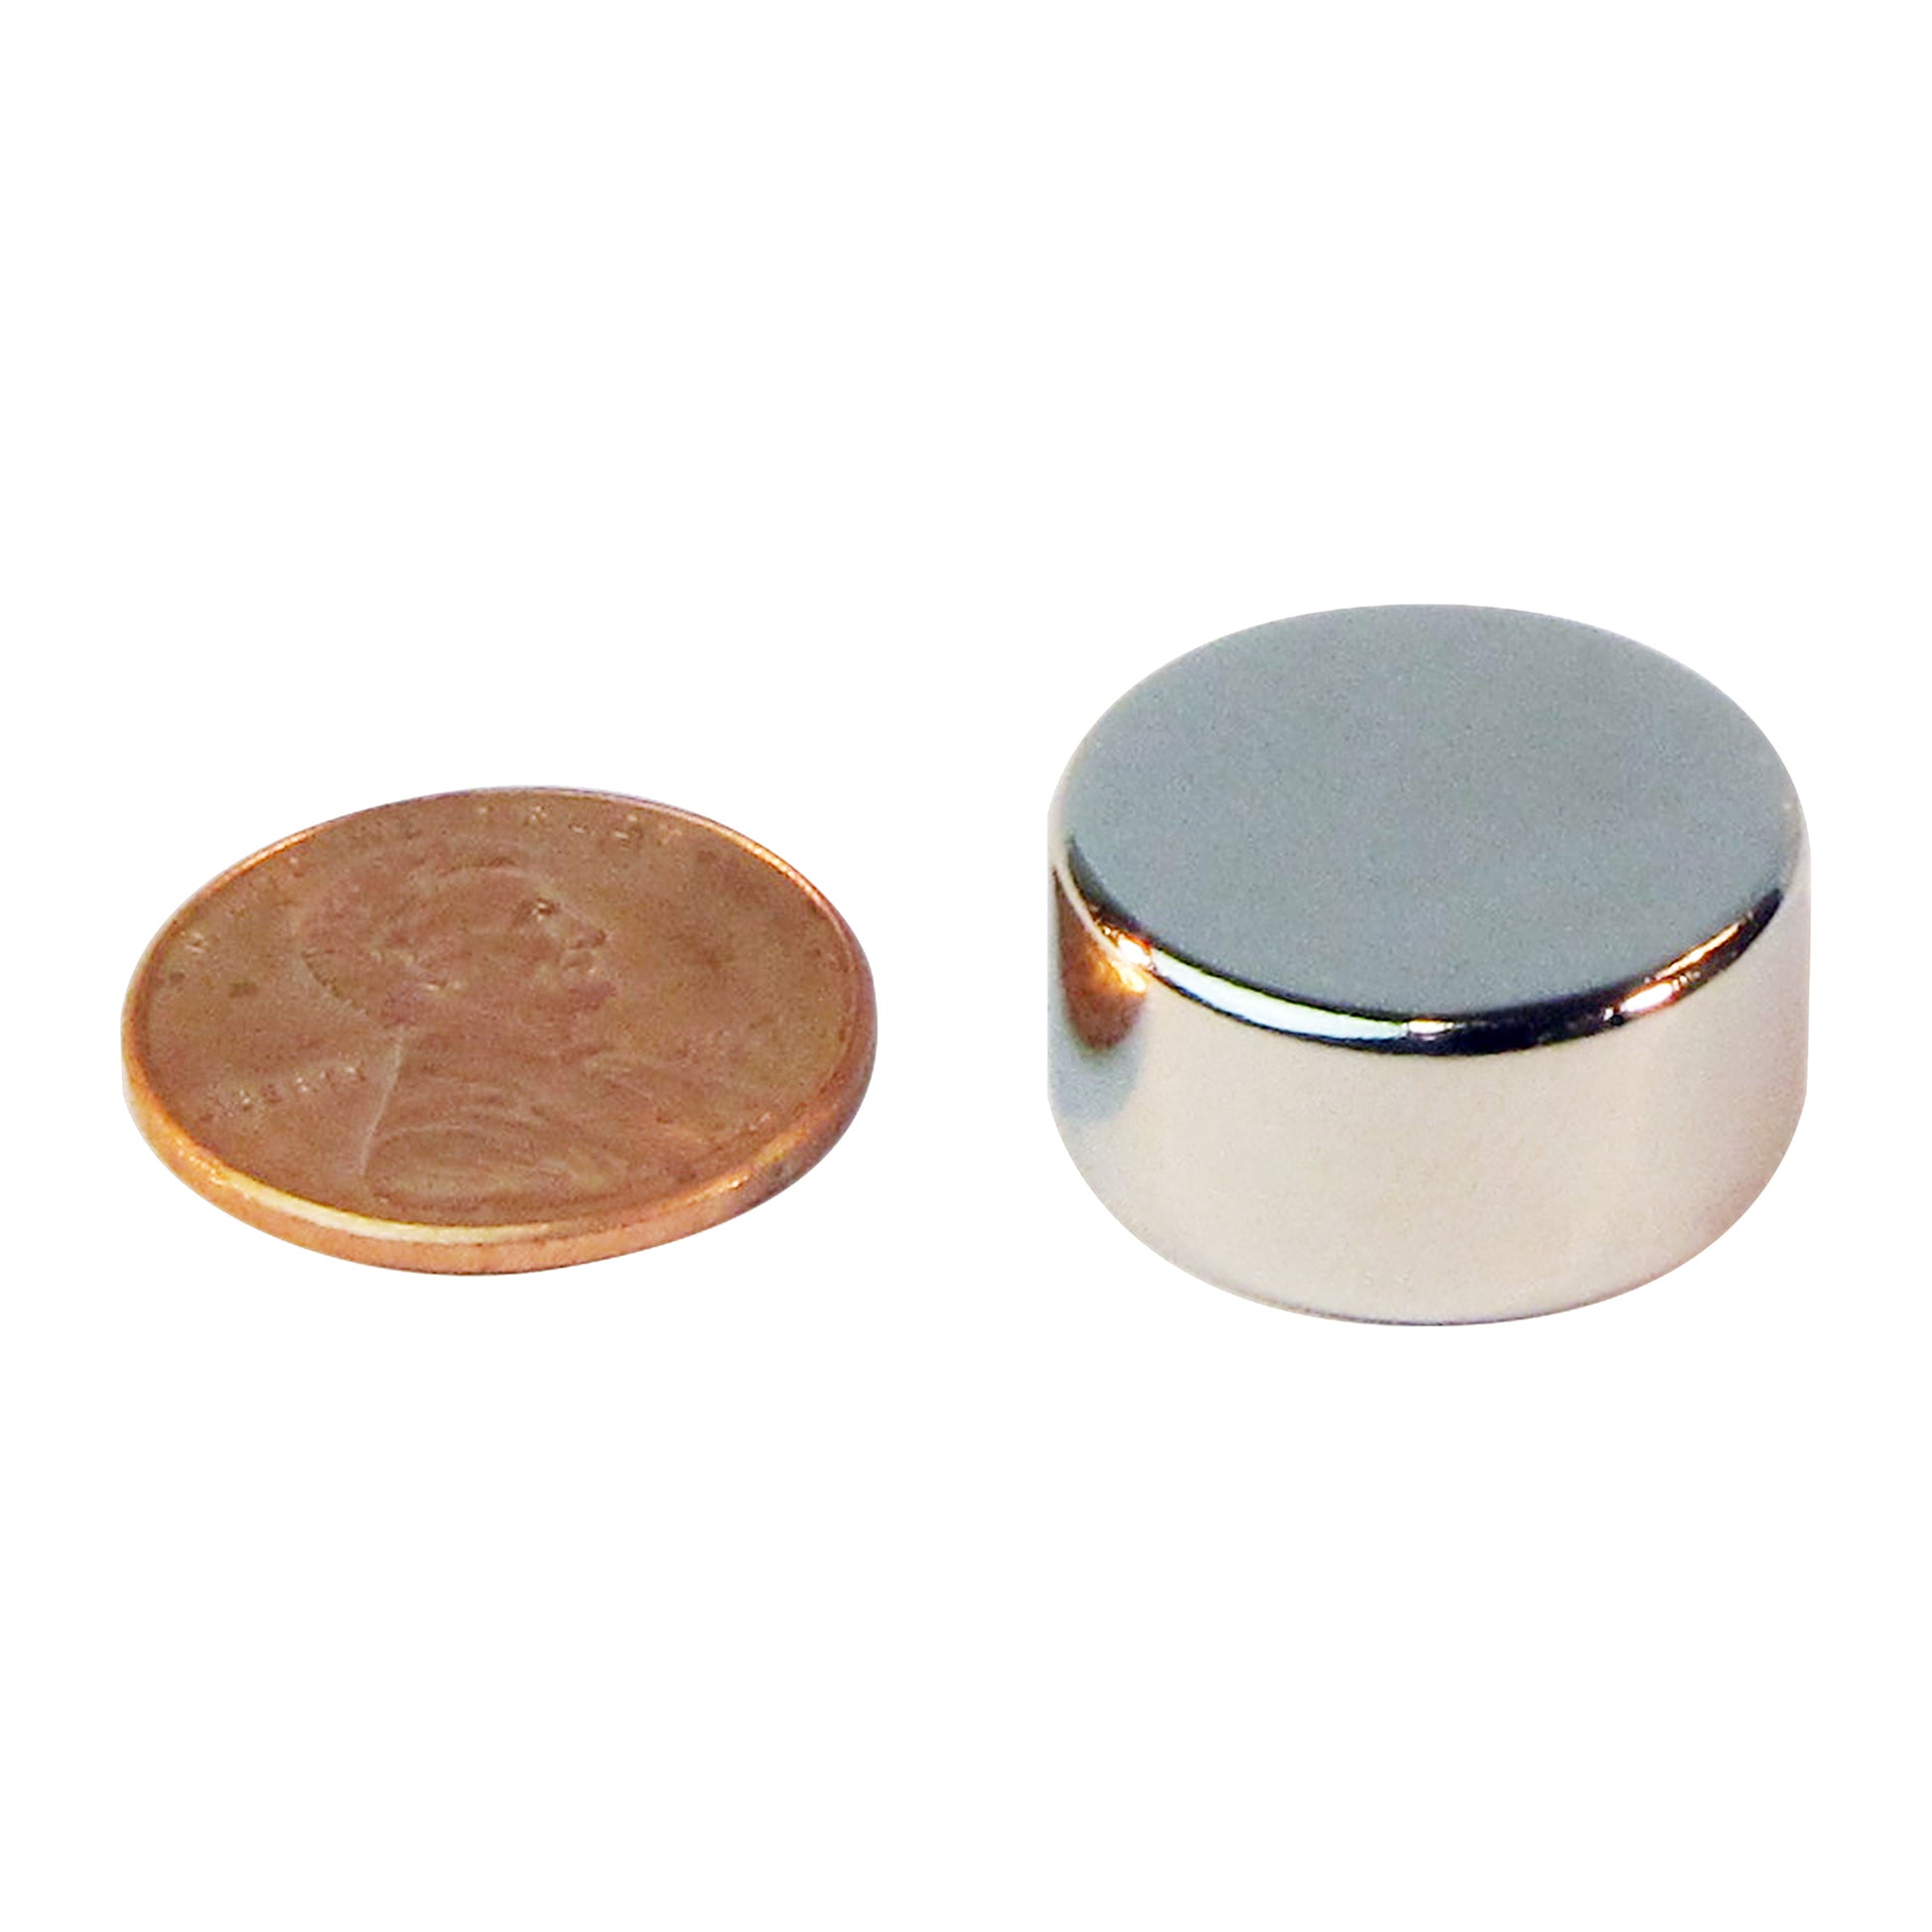 Load image into Gallery viewer, ND45-7537N Neodymium Disc Magnet - Compared to Penny for Size Reference